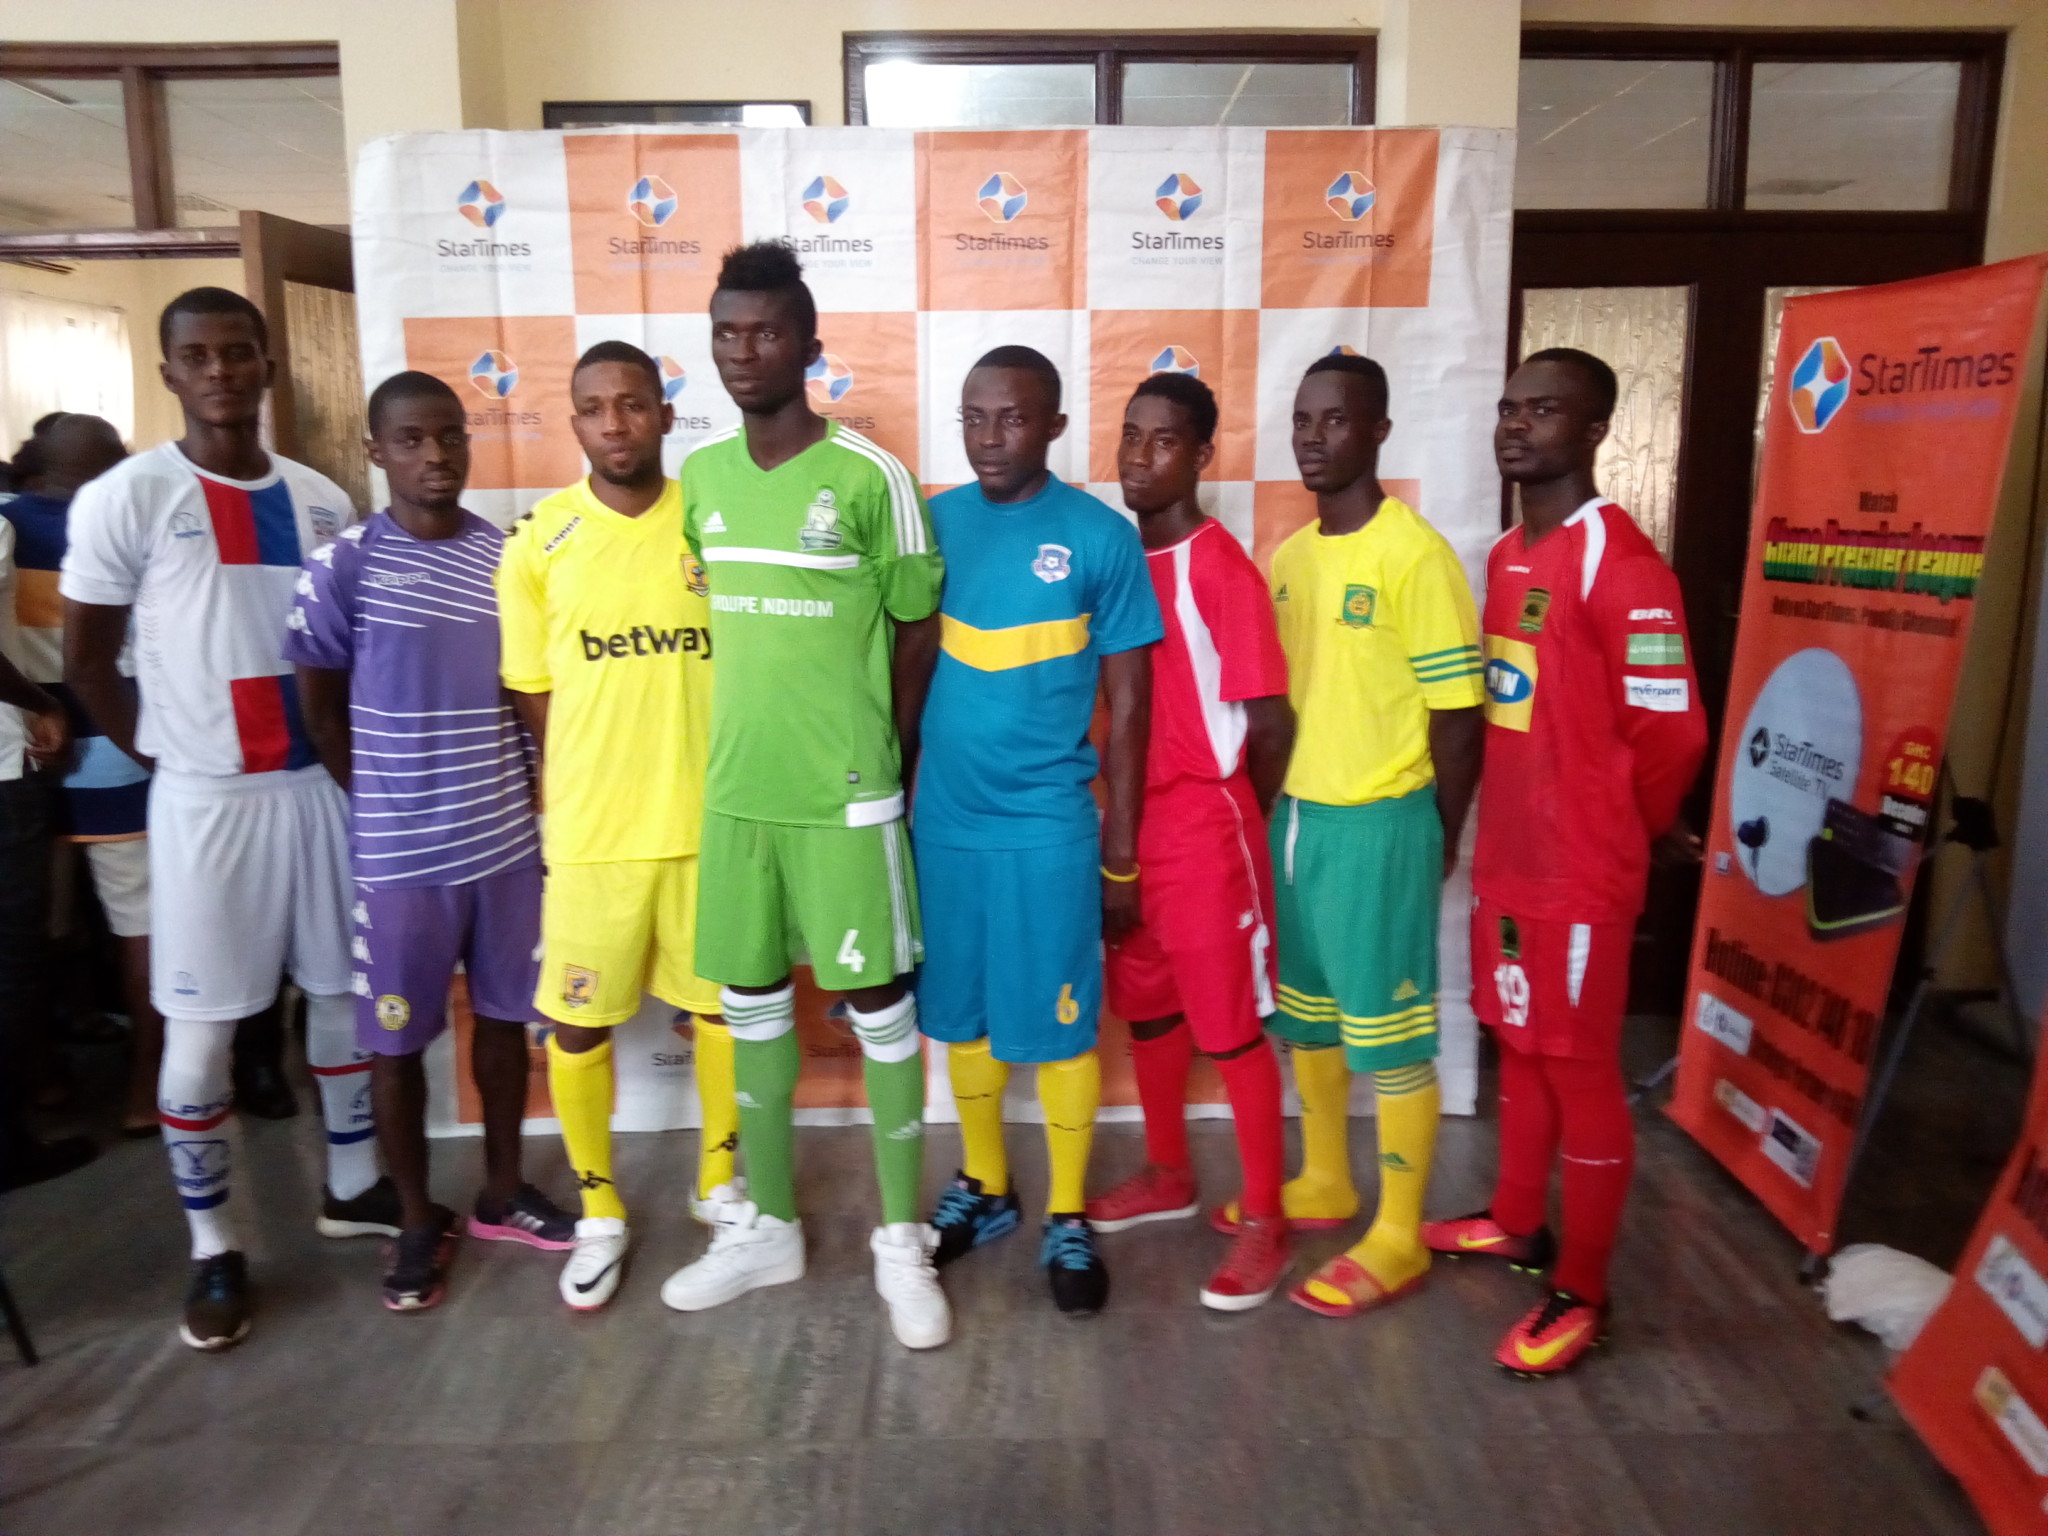 Ghana Premier League clubs unveil home and away kits at the launch of the 2016/17 league season